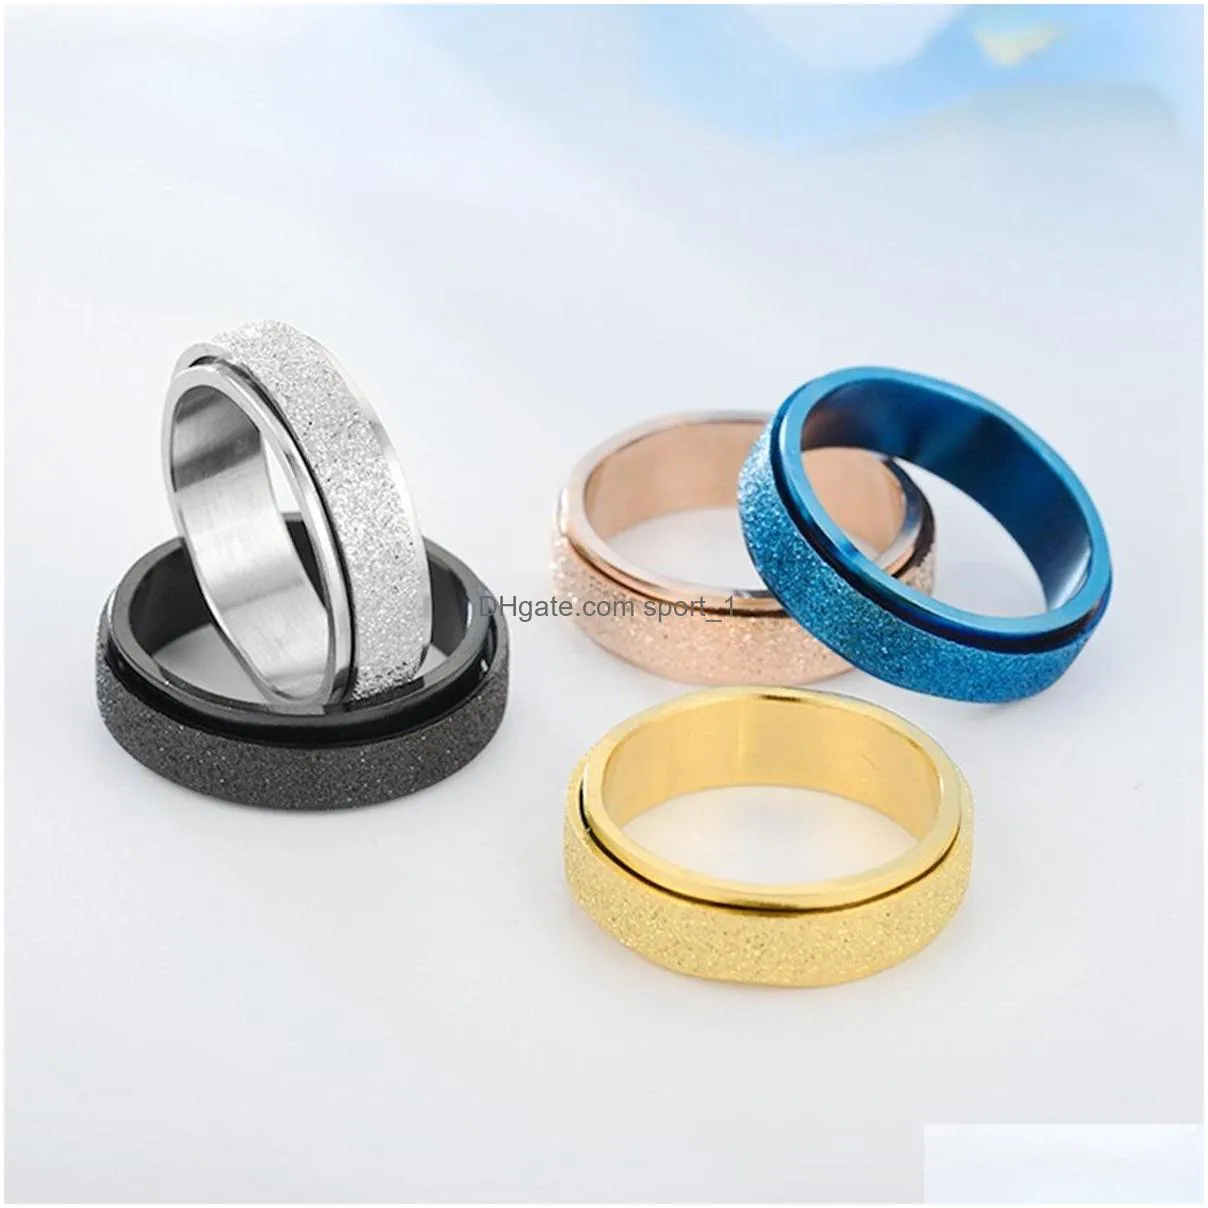 women stainless steel band ring men girl boy anxiety relief 6mm fidget silver gold blue perfect weddings parties celebrations